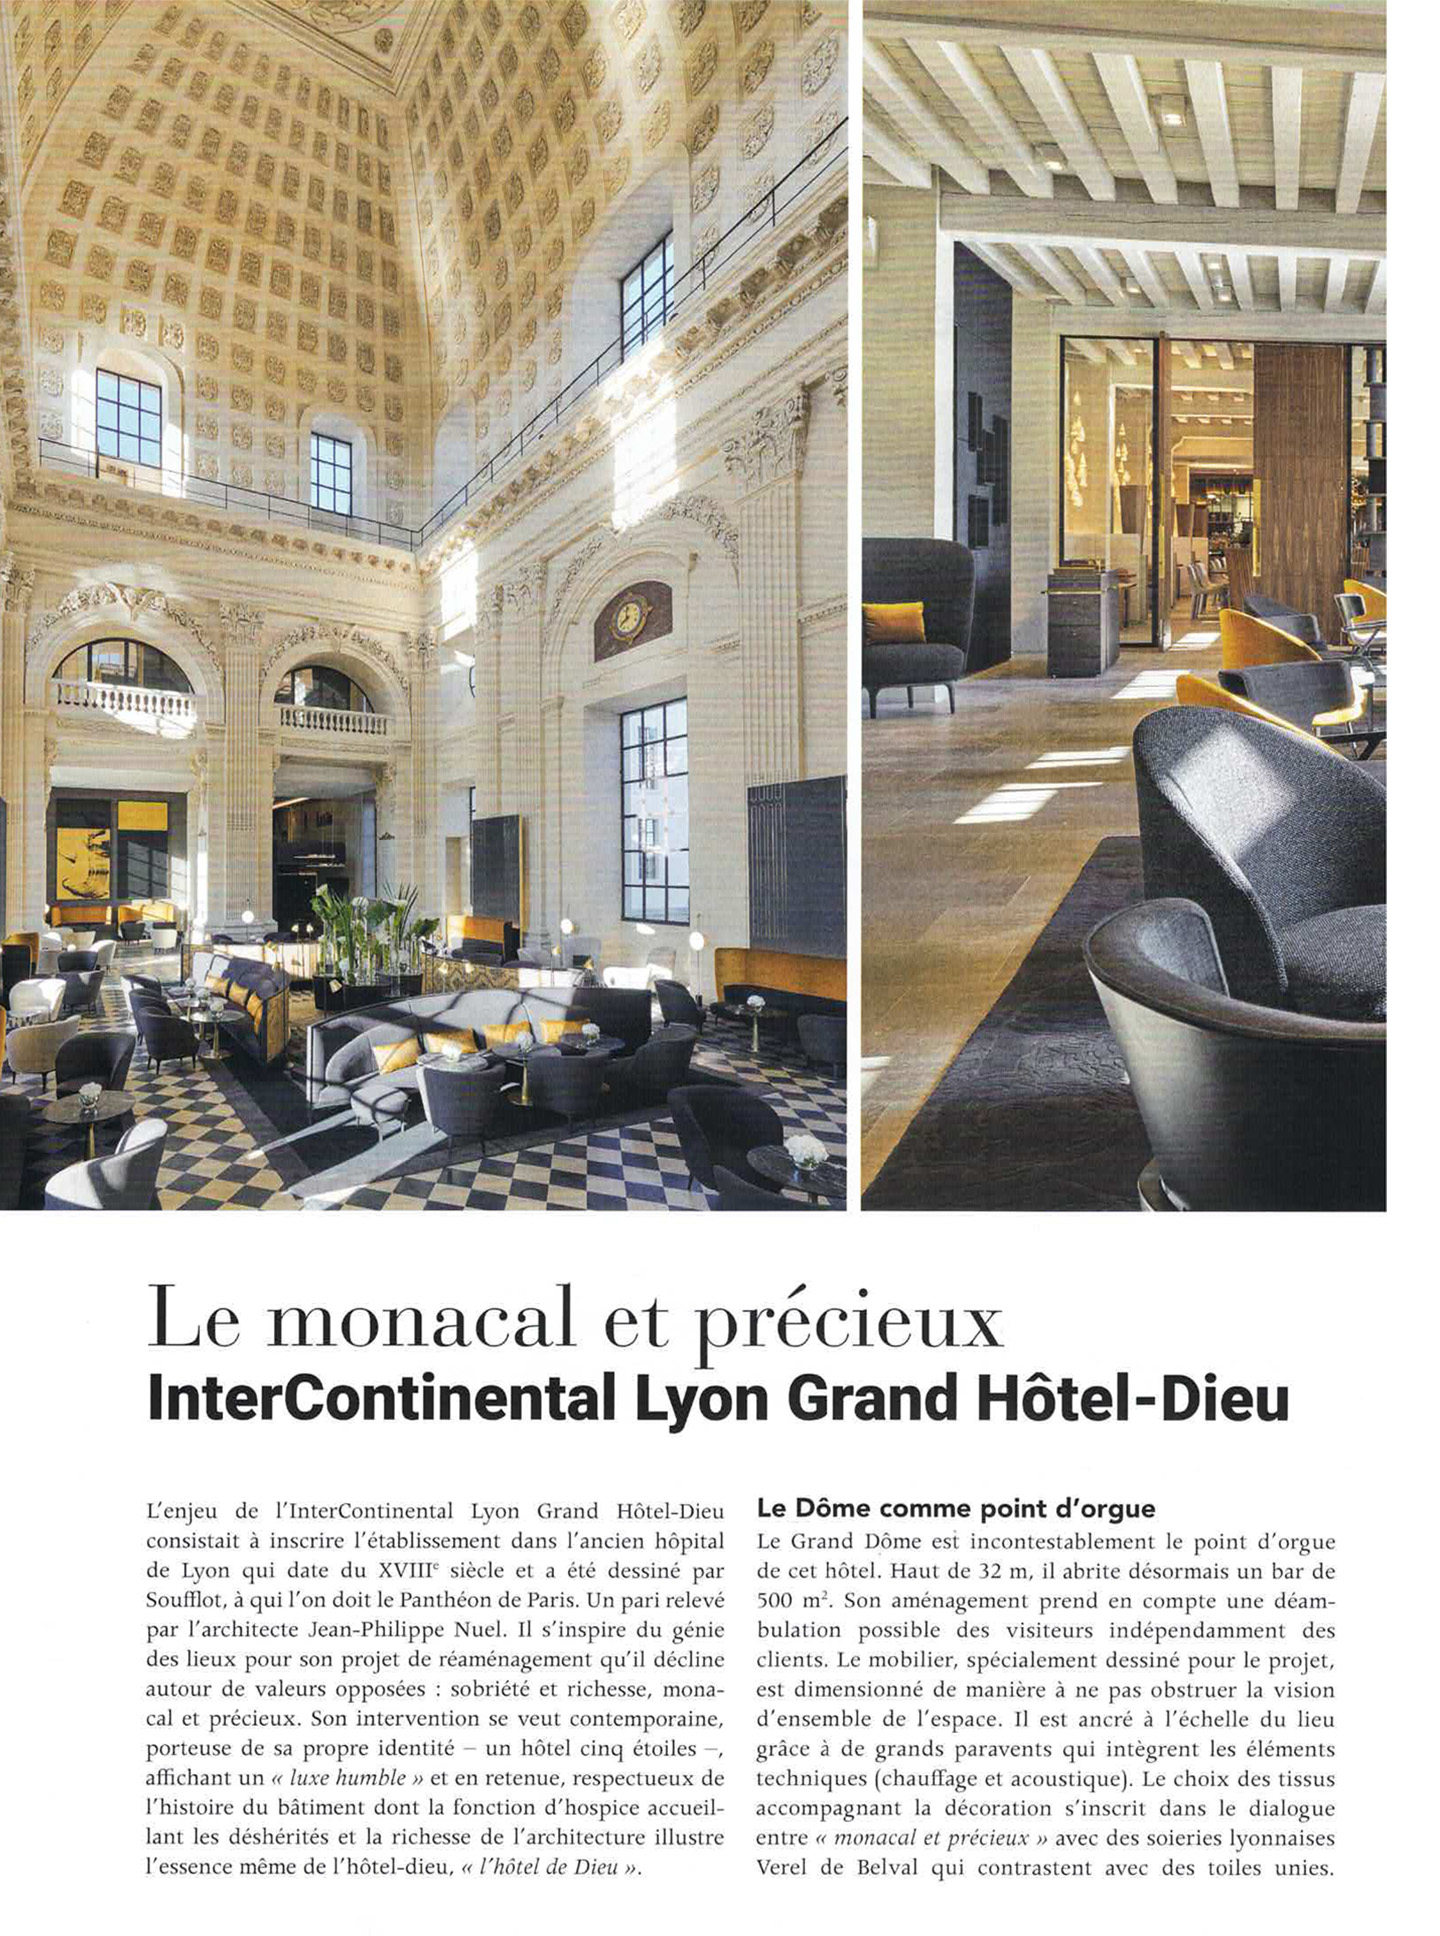 Article on the InterContinental Lyon Hotel Dieu realized by the studio jean-Philippe Nuel in the magazine In Interiors, new luxury hotel, luxury interior design, historical heritage